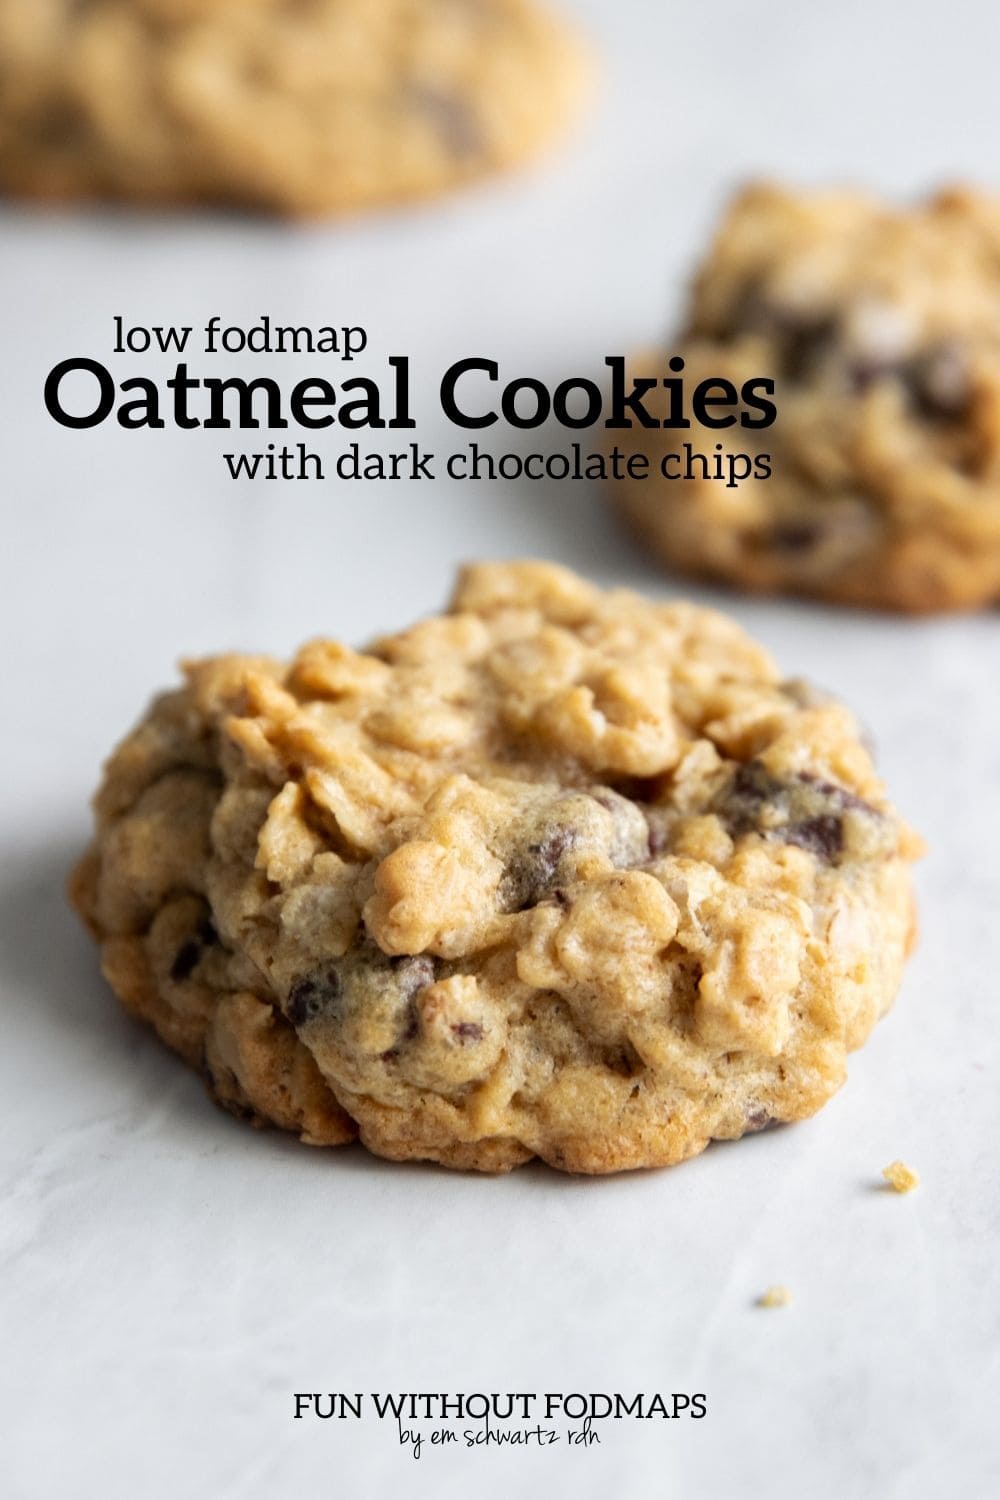 Three cookies on a marble counter. A black text overlay reads "low FODMAP oatmeal cookies with dark chocolate chips".